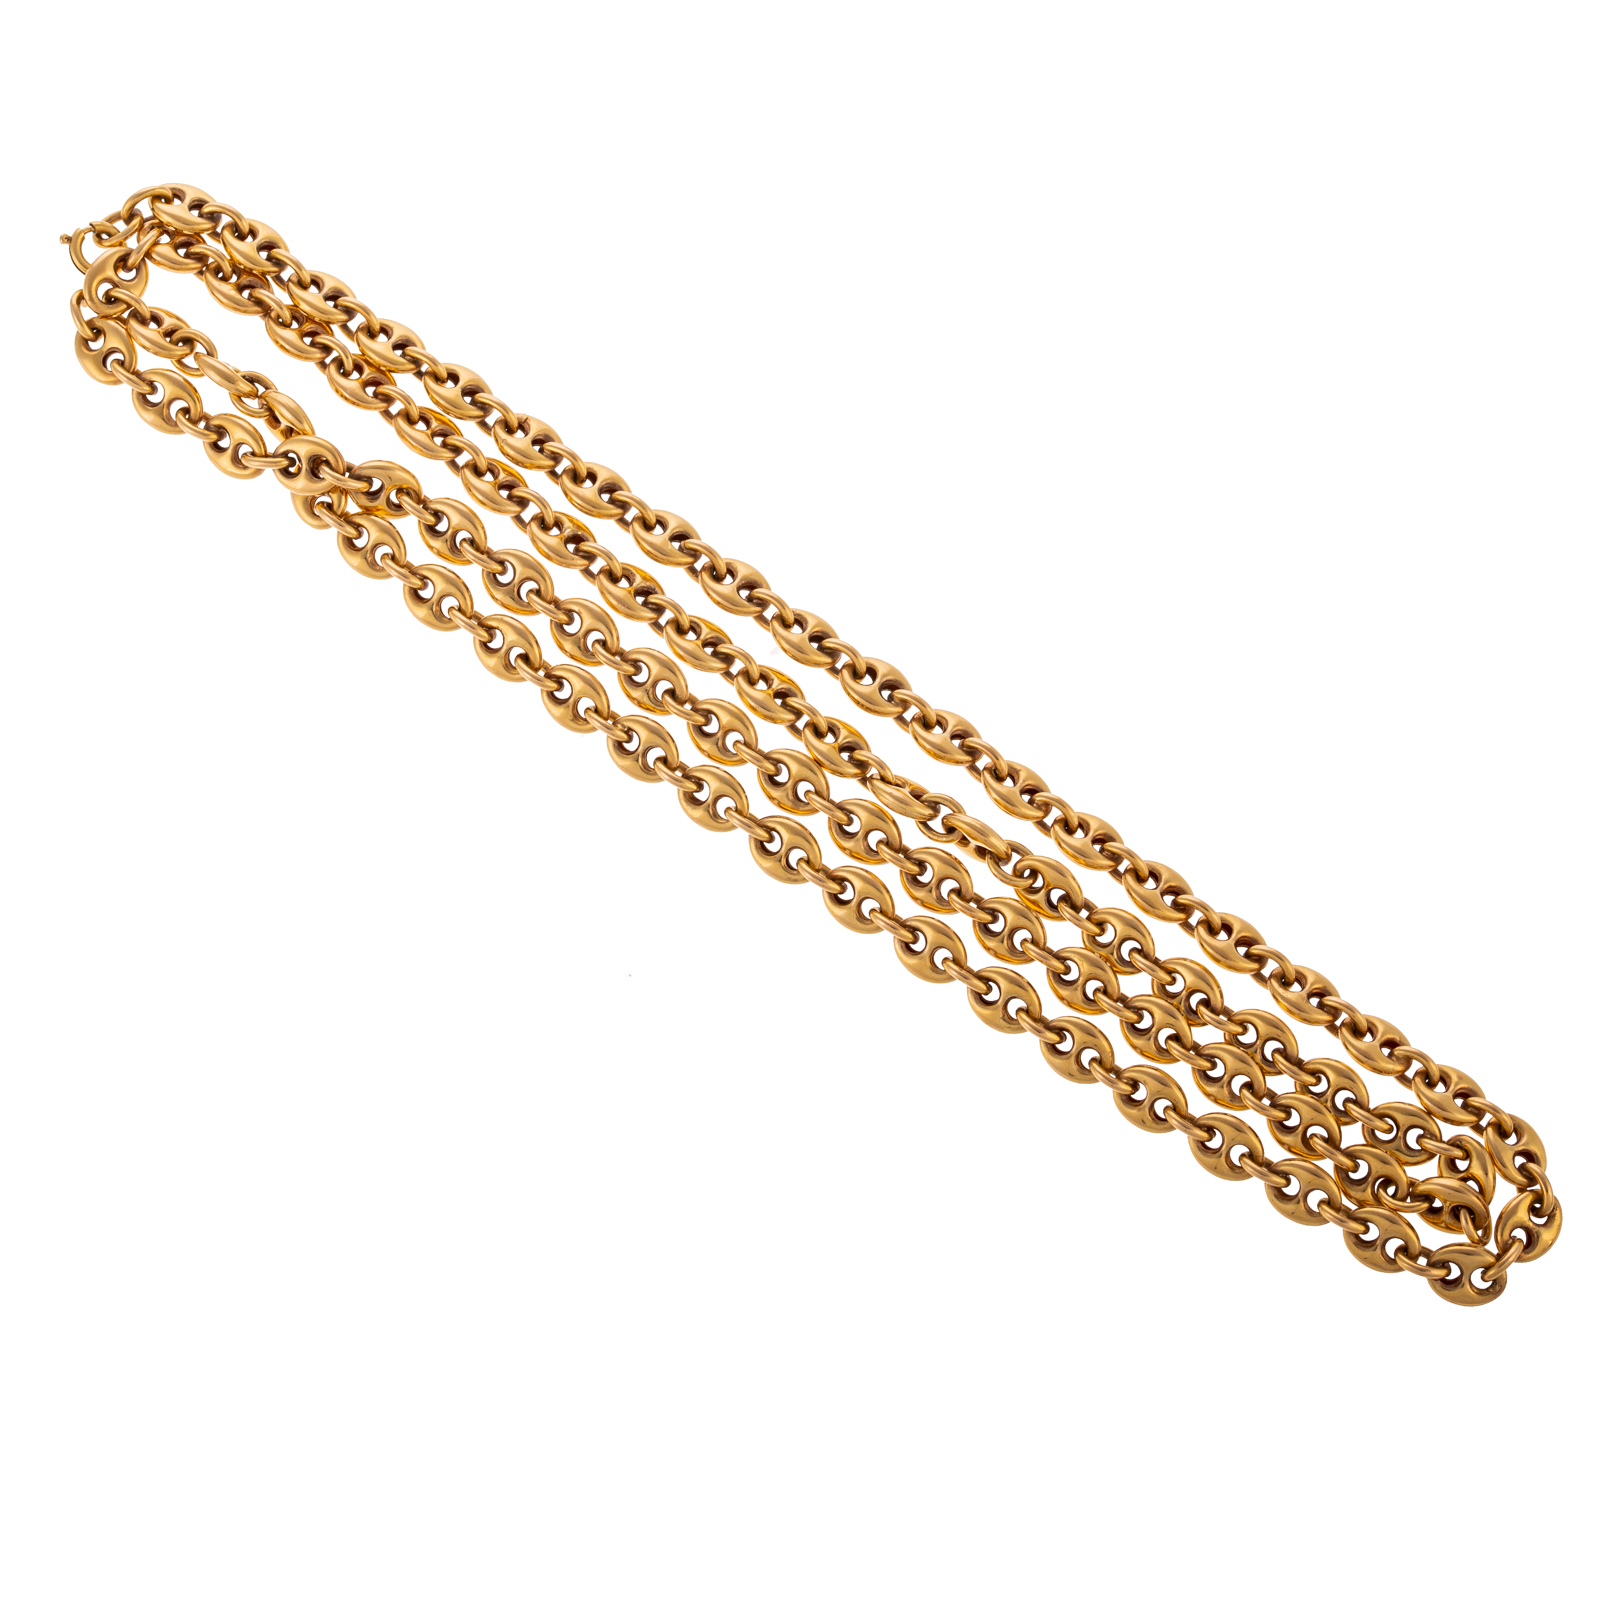 A HEAVY ANCHOR LINK CHAIN NECKLACE